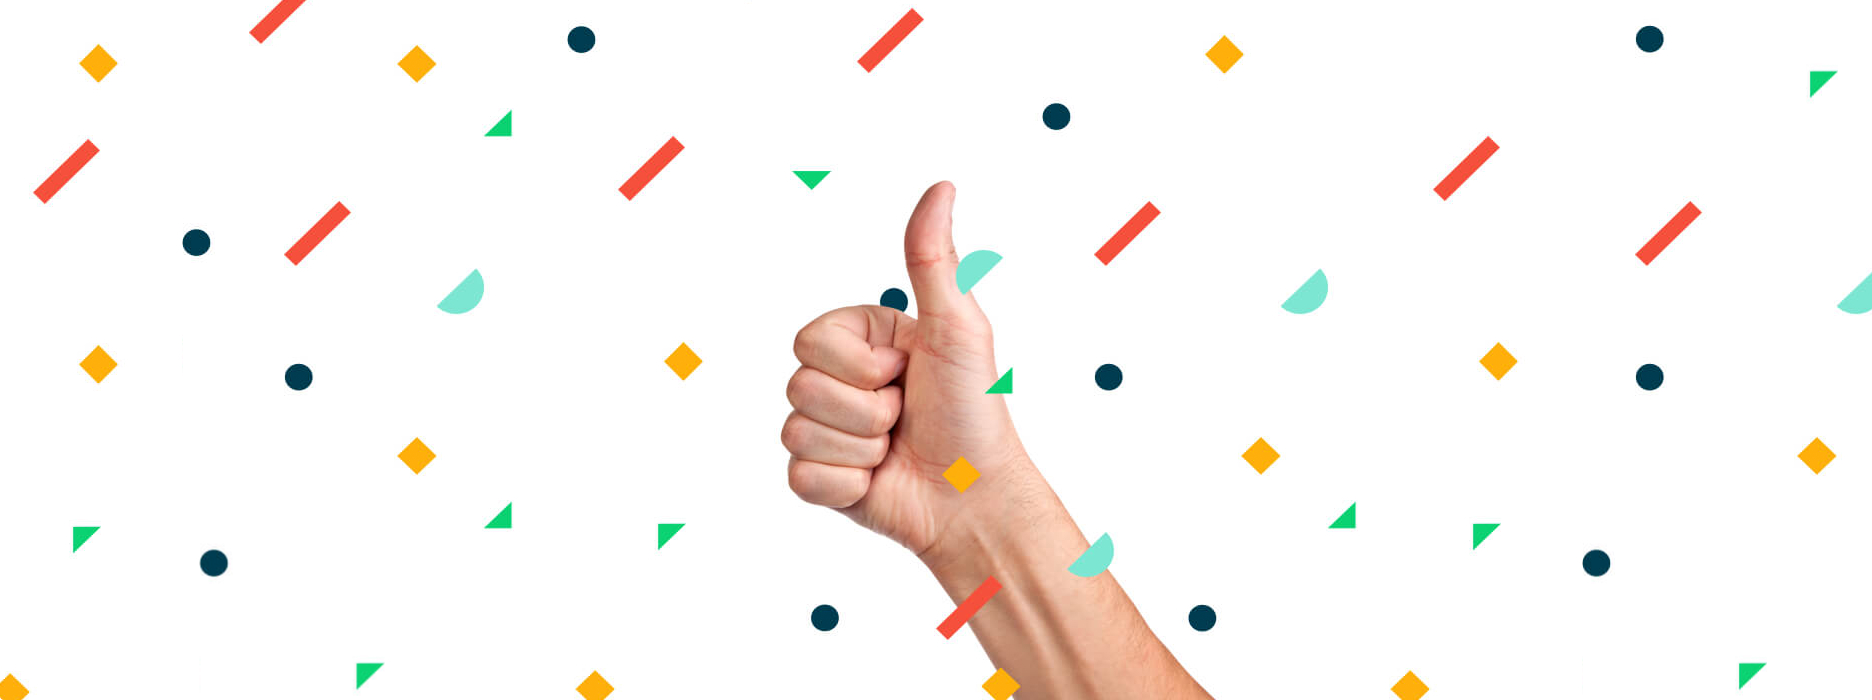 Image of a hand giving a thumbs up gesture while multicoloured shapes rain down 